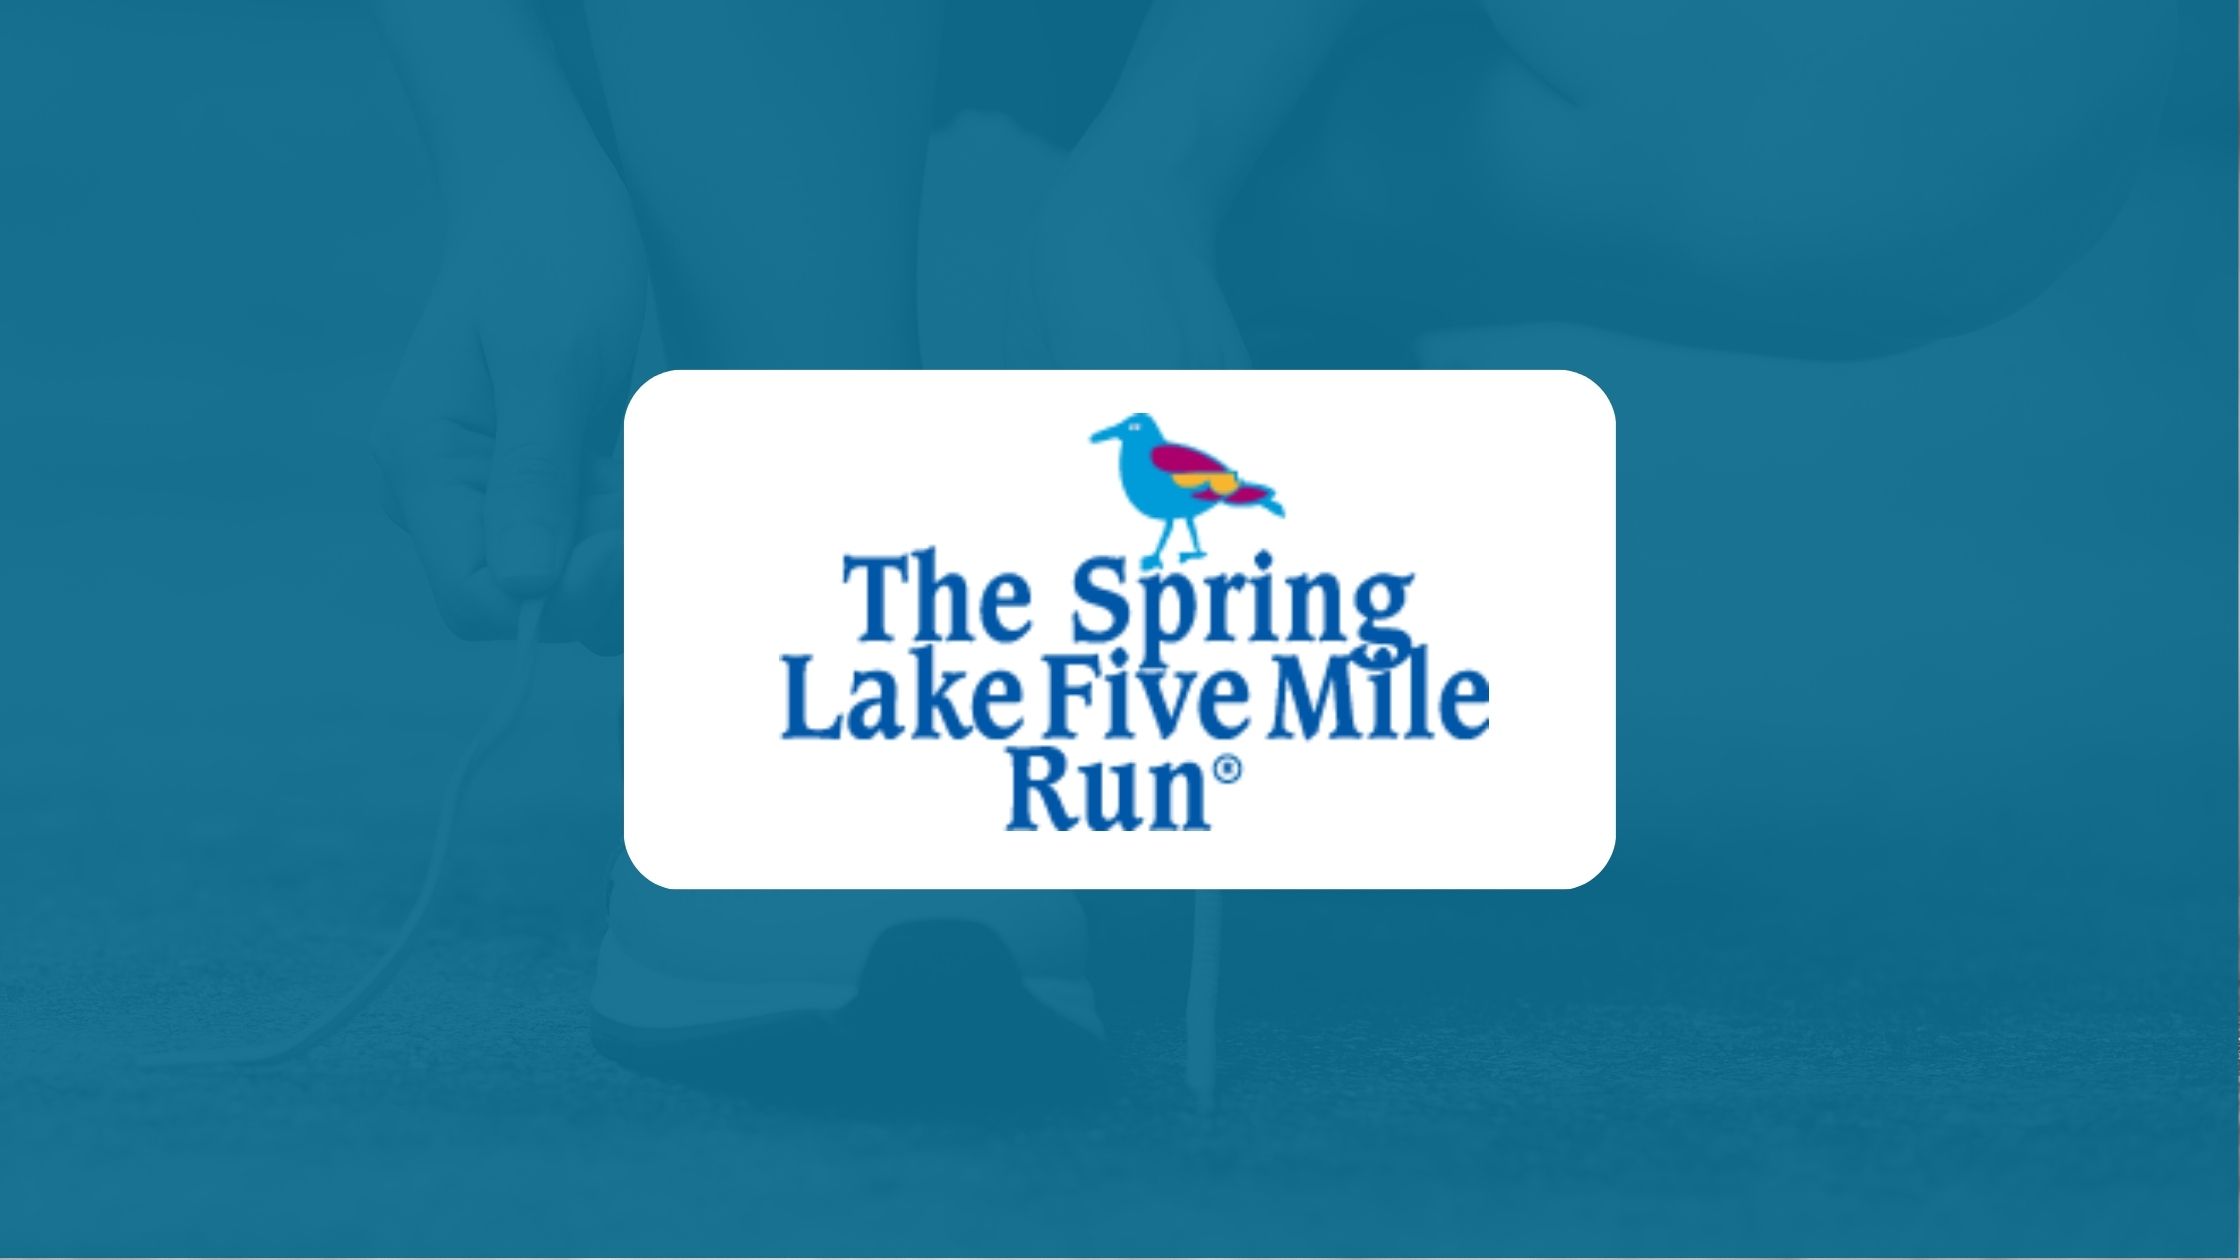 We're running at the Spring Lake 5, join the team